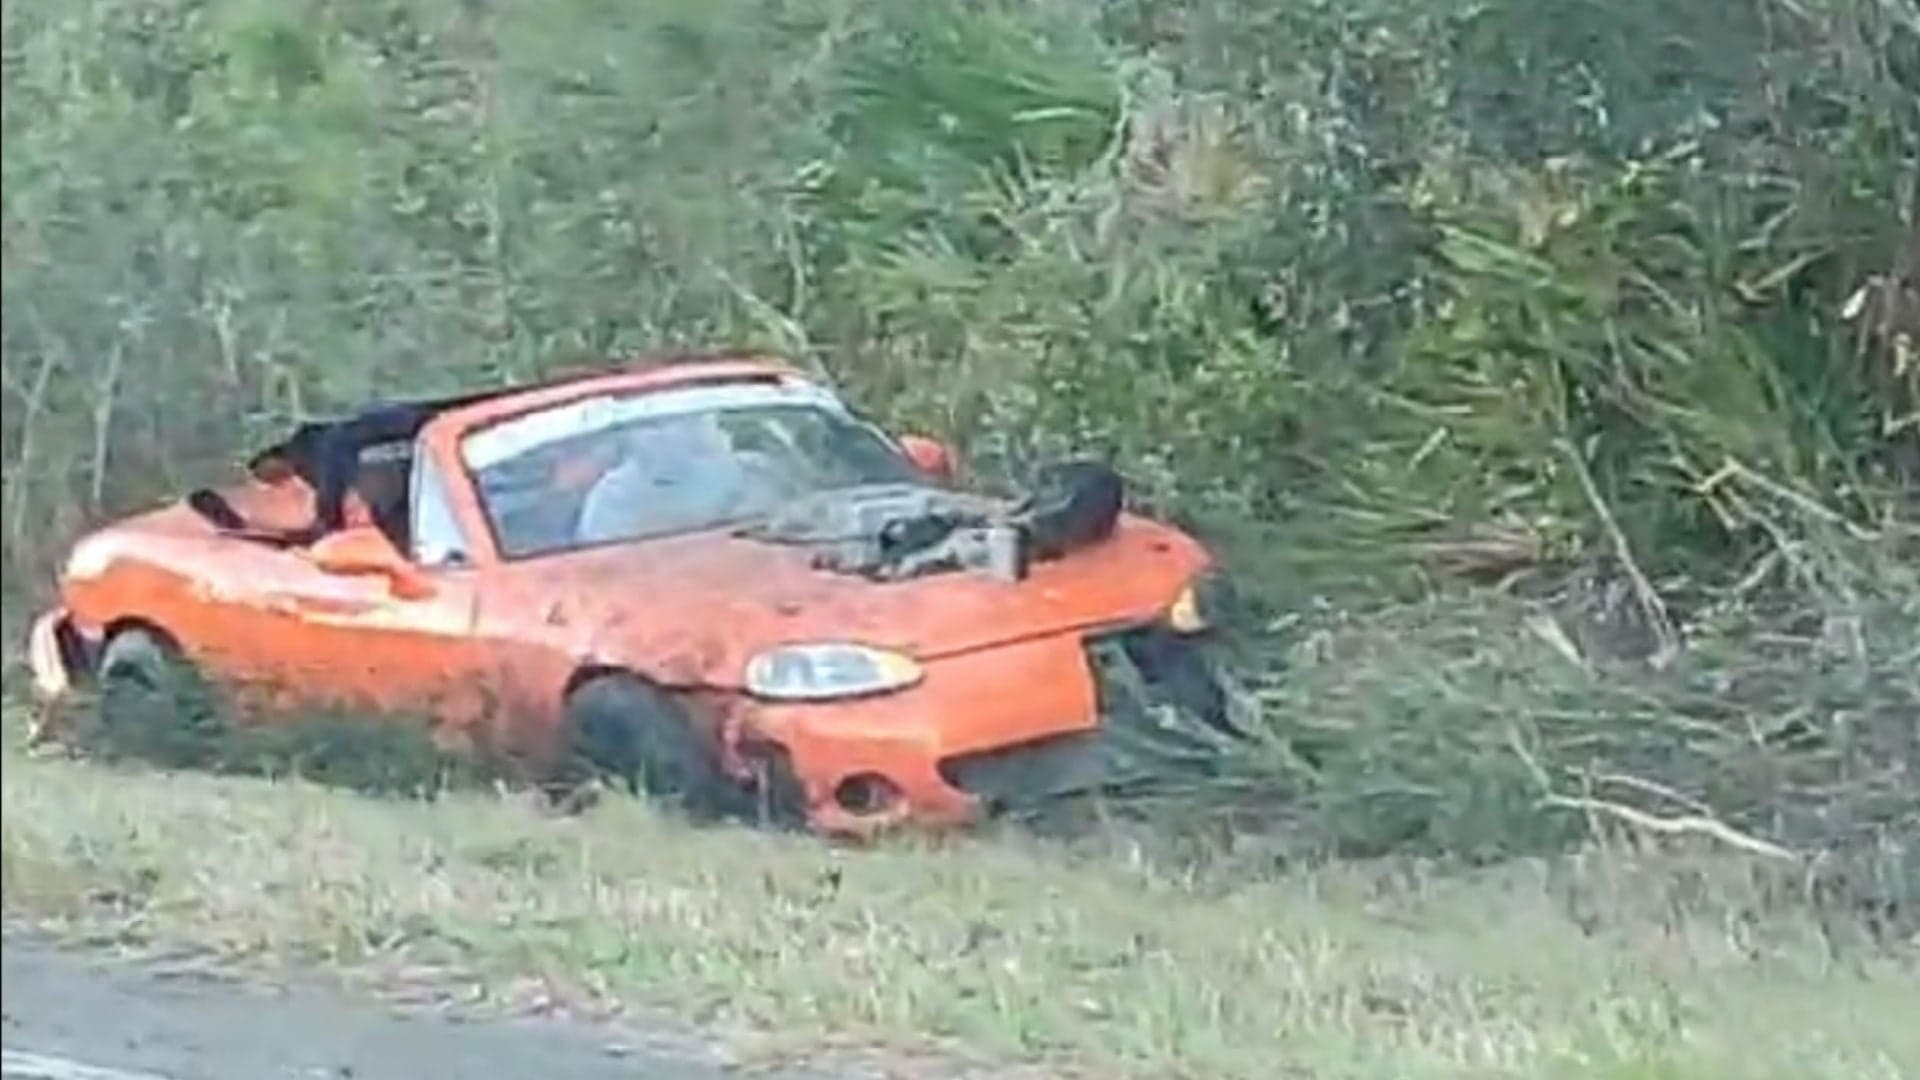 Legendary Hellcat-Powered Mazda Miata Lands in Ditch After Leaving Car Meet